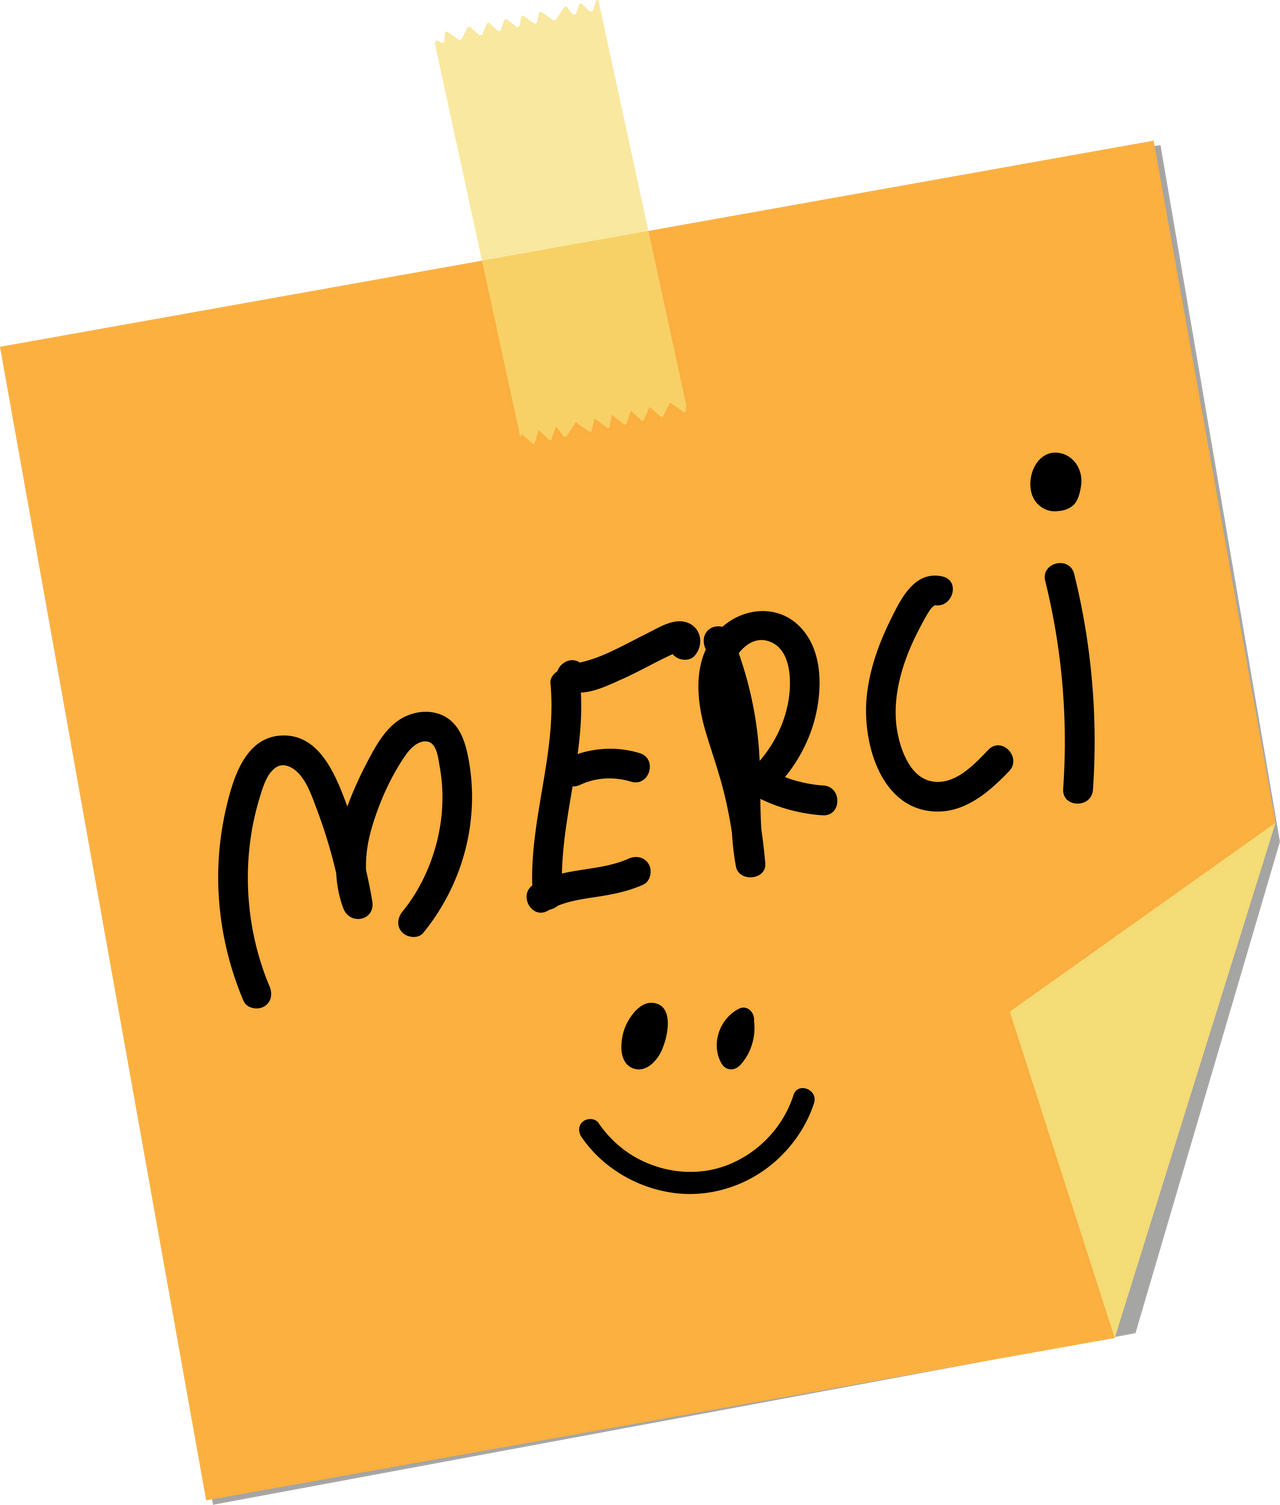 merci on a note paper